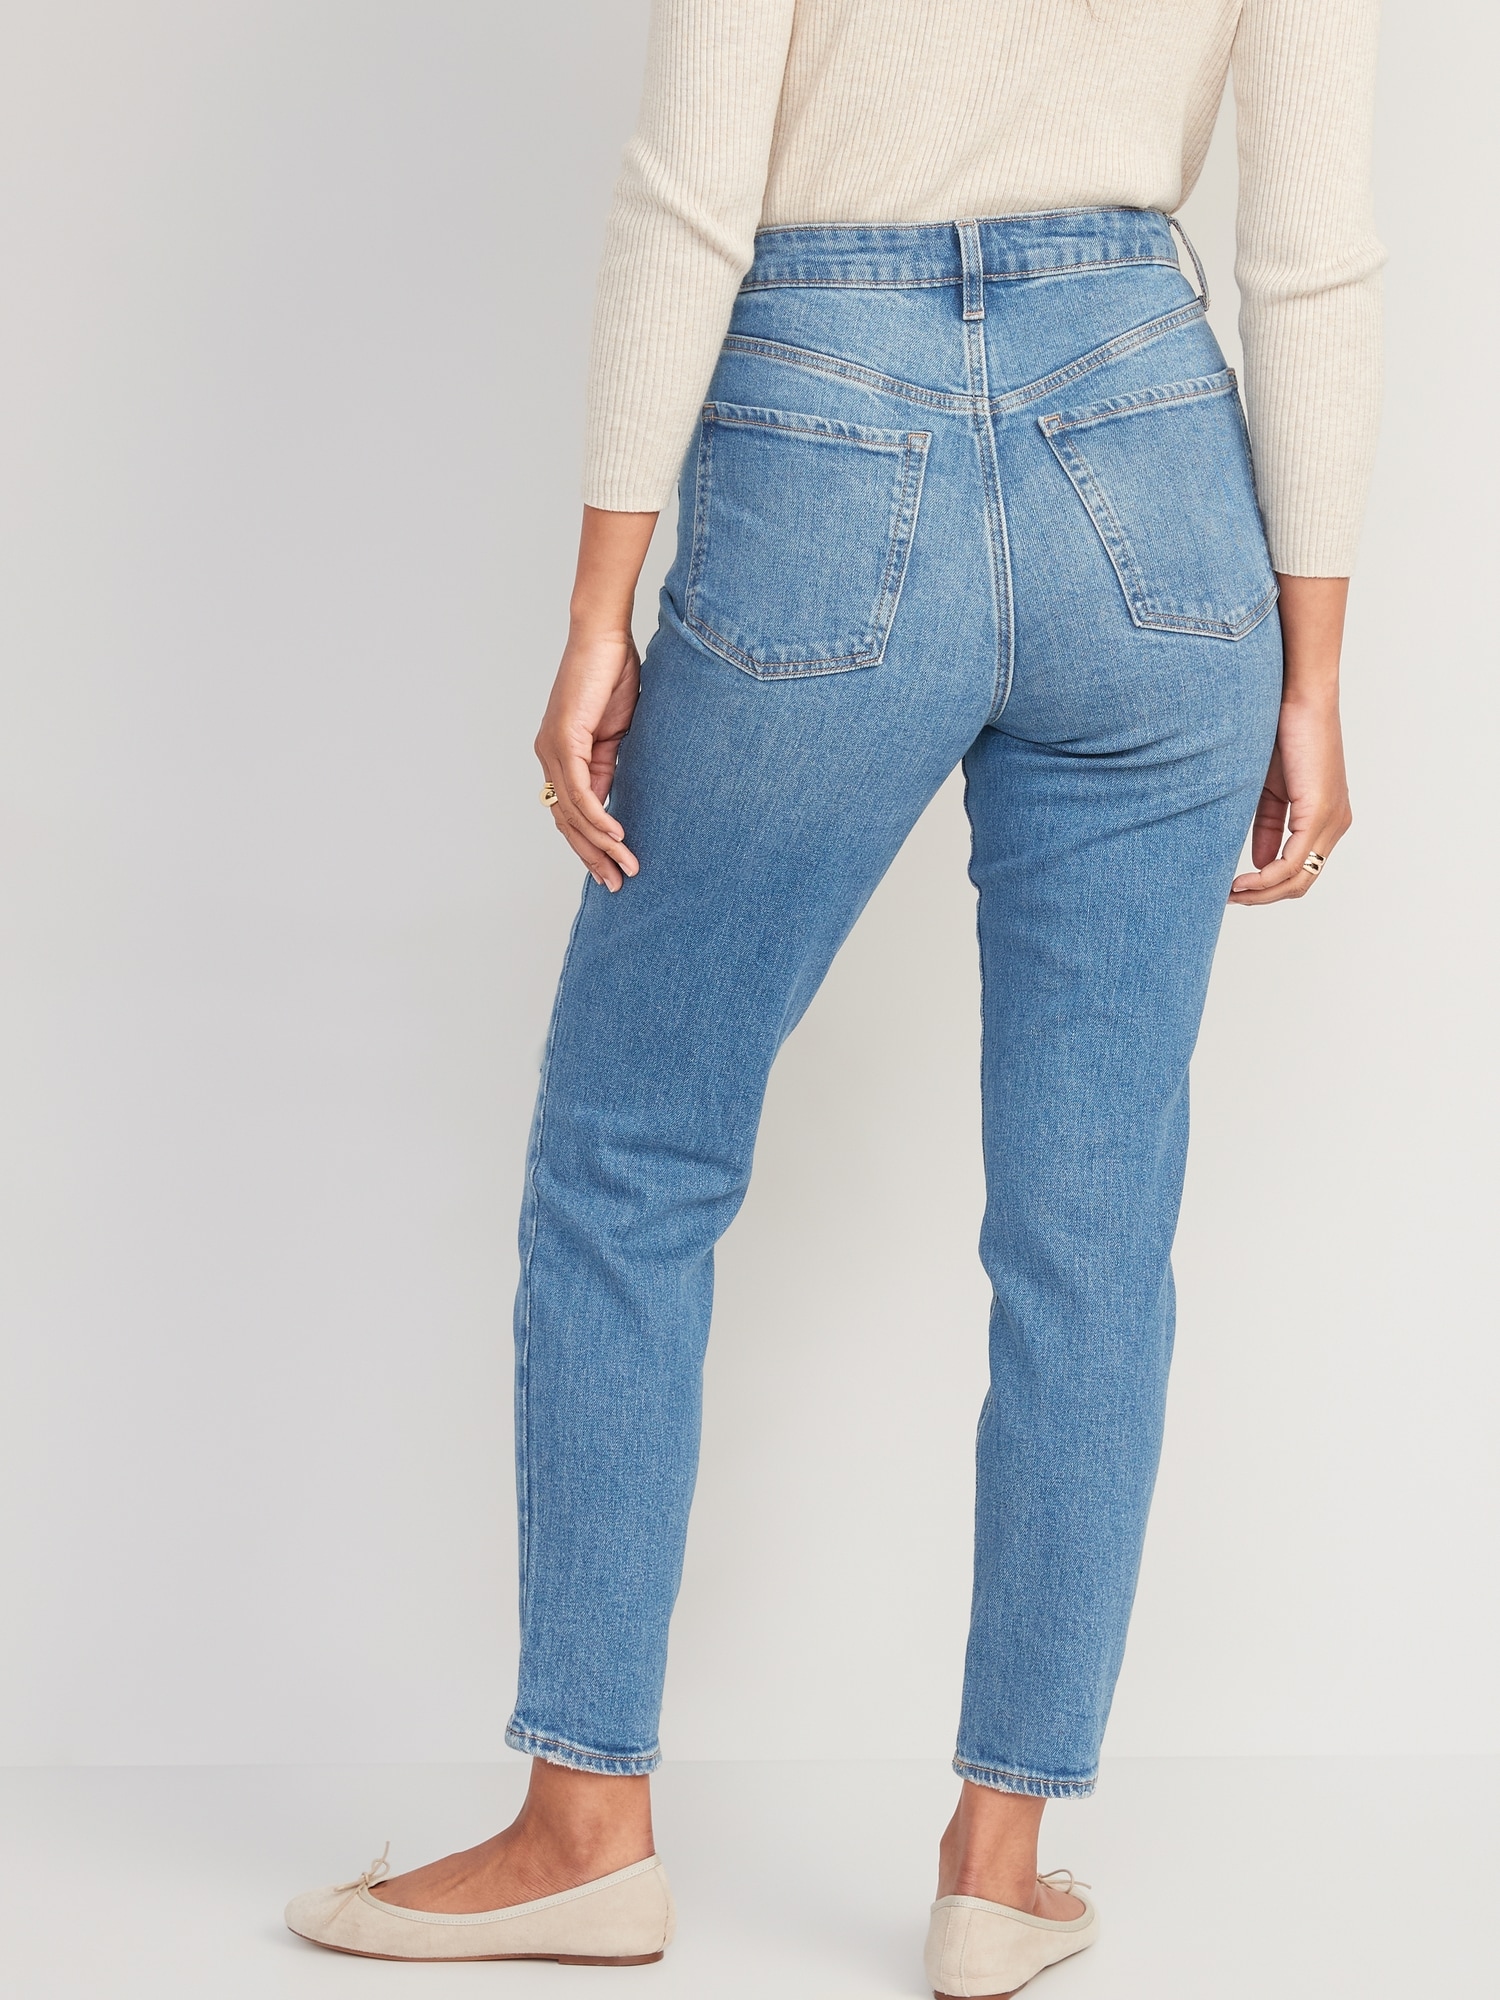 Higher High-Waisted OG Straight Ripped Jeans for Women | Old Navy